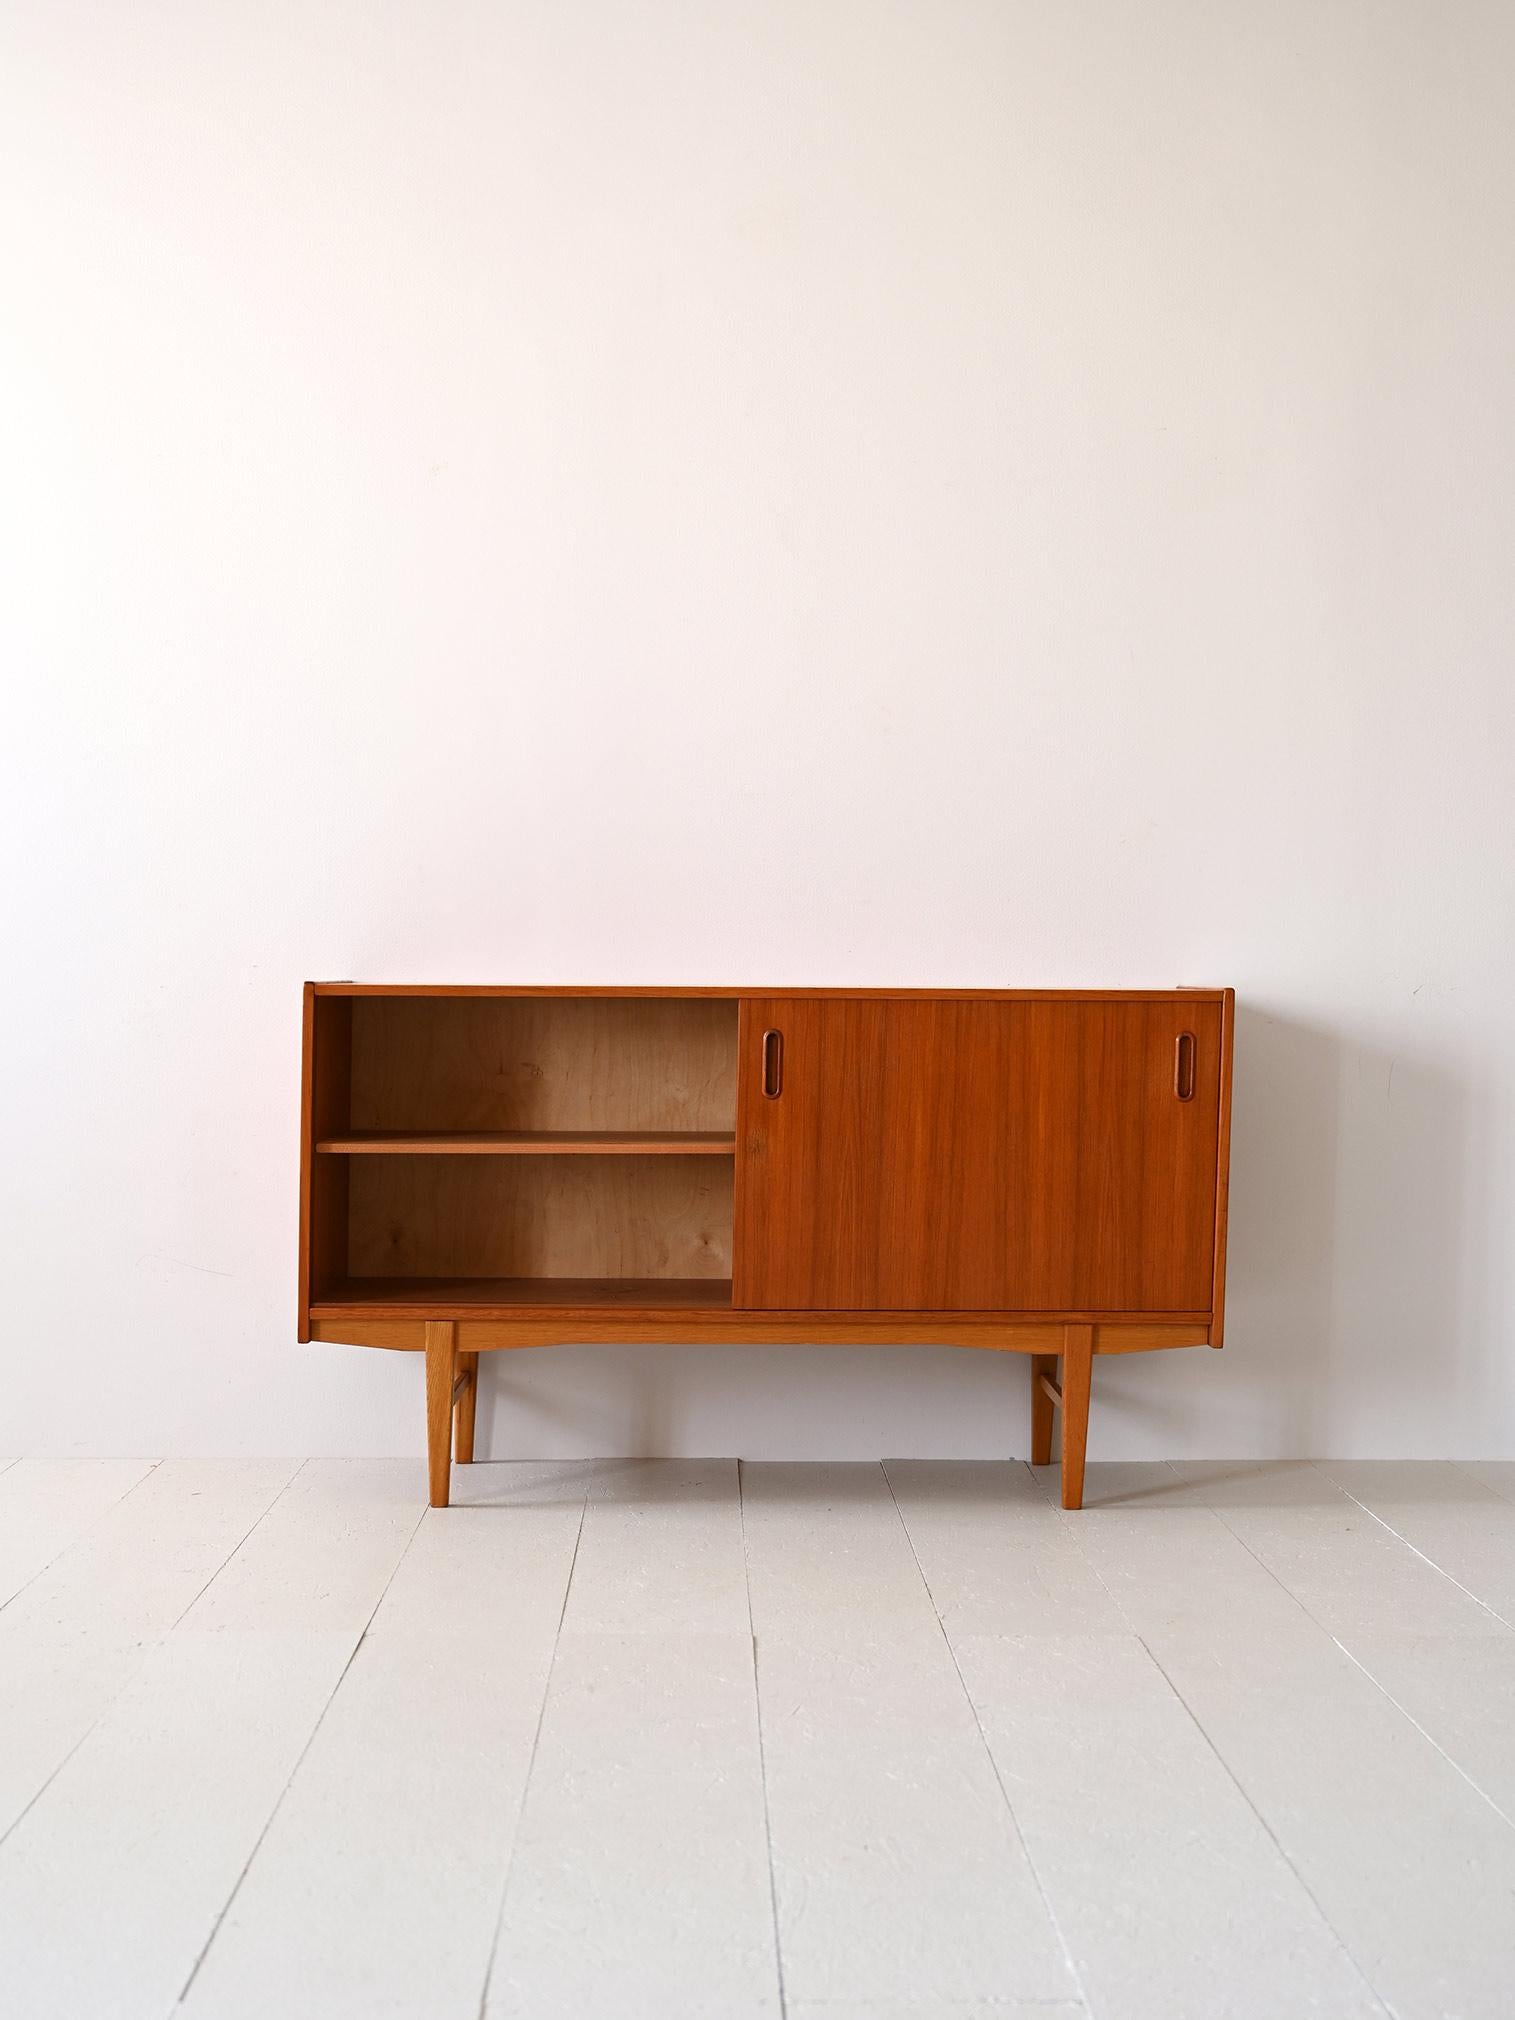 Scandinavian 1960s sideboard in teak and oak.

This cabinet with modern lines consists of 5 drawers on one side and a compartment with a sliding door on the other. Inside is a shelf that divides the space. The handle of the drawers and door is